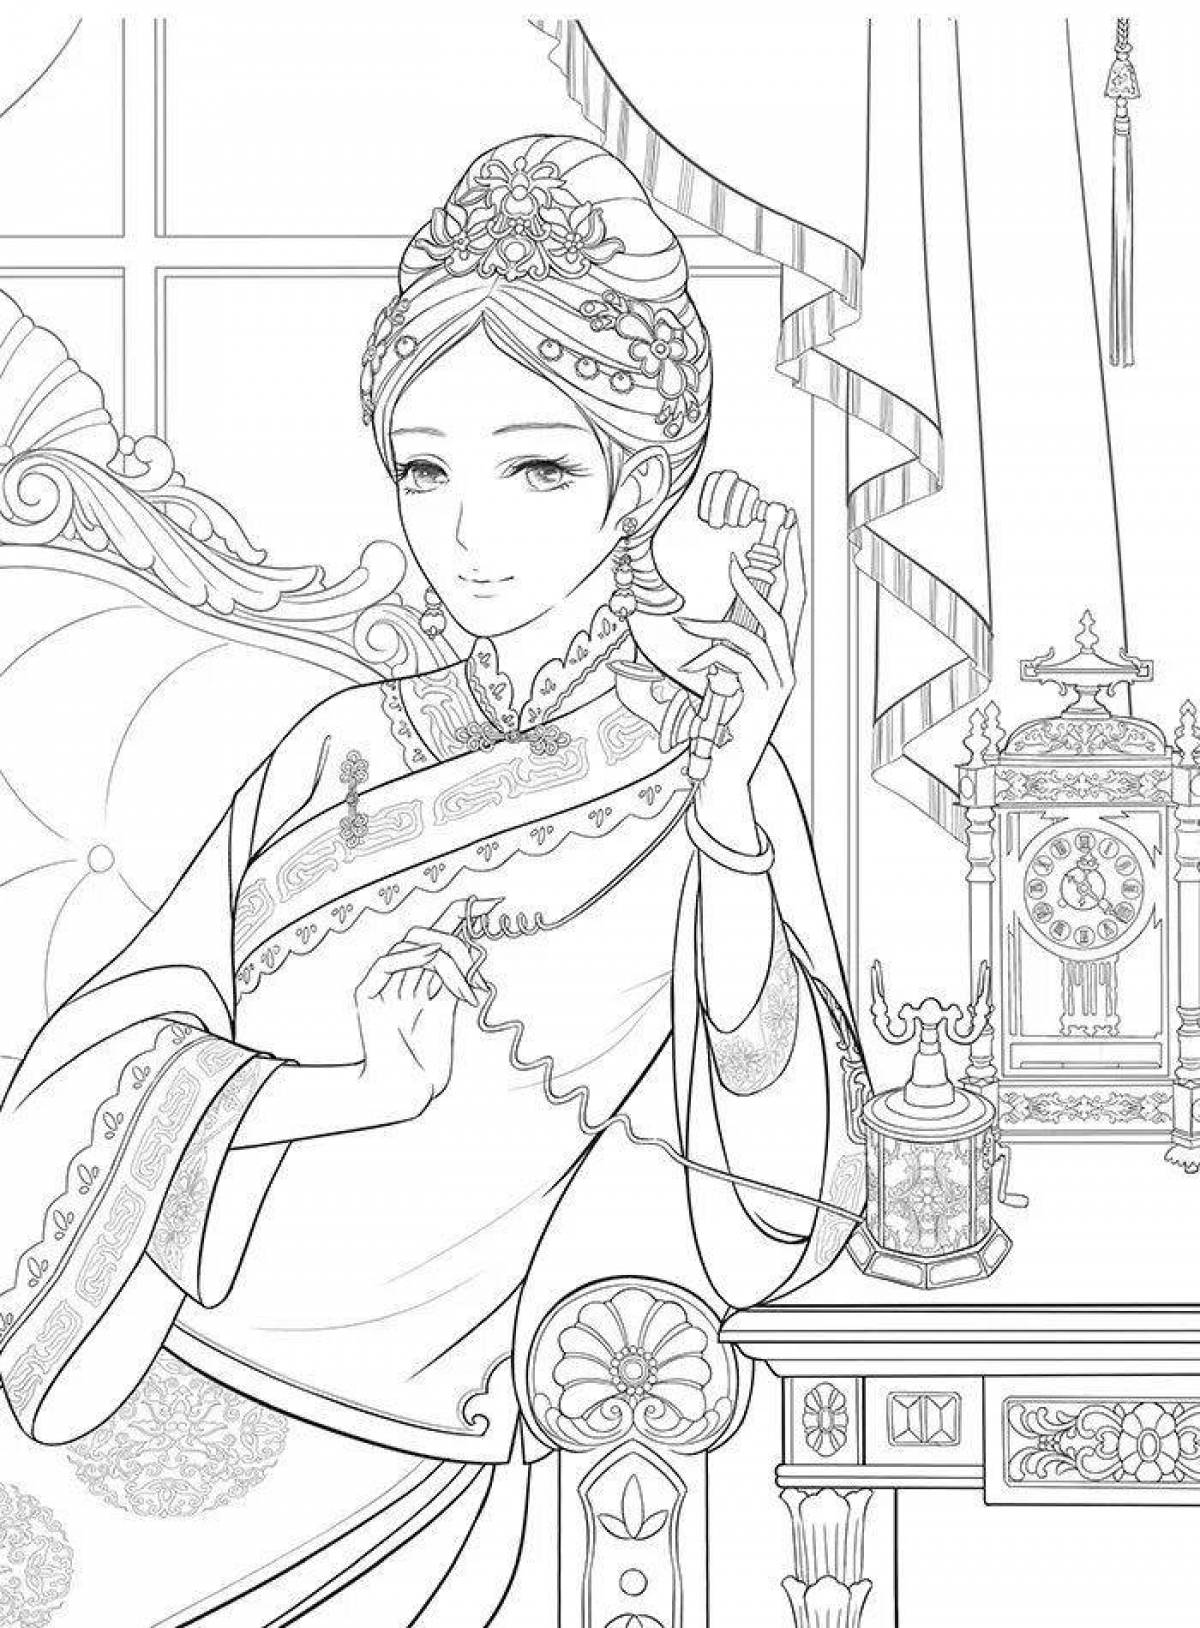 Awesome Chinese girls coloring pages